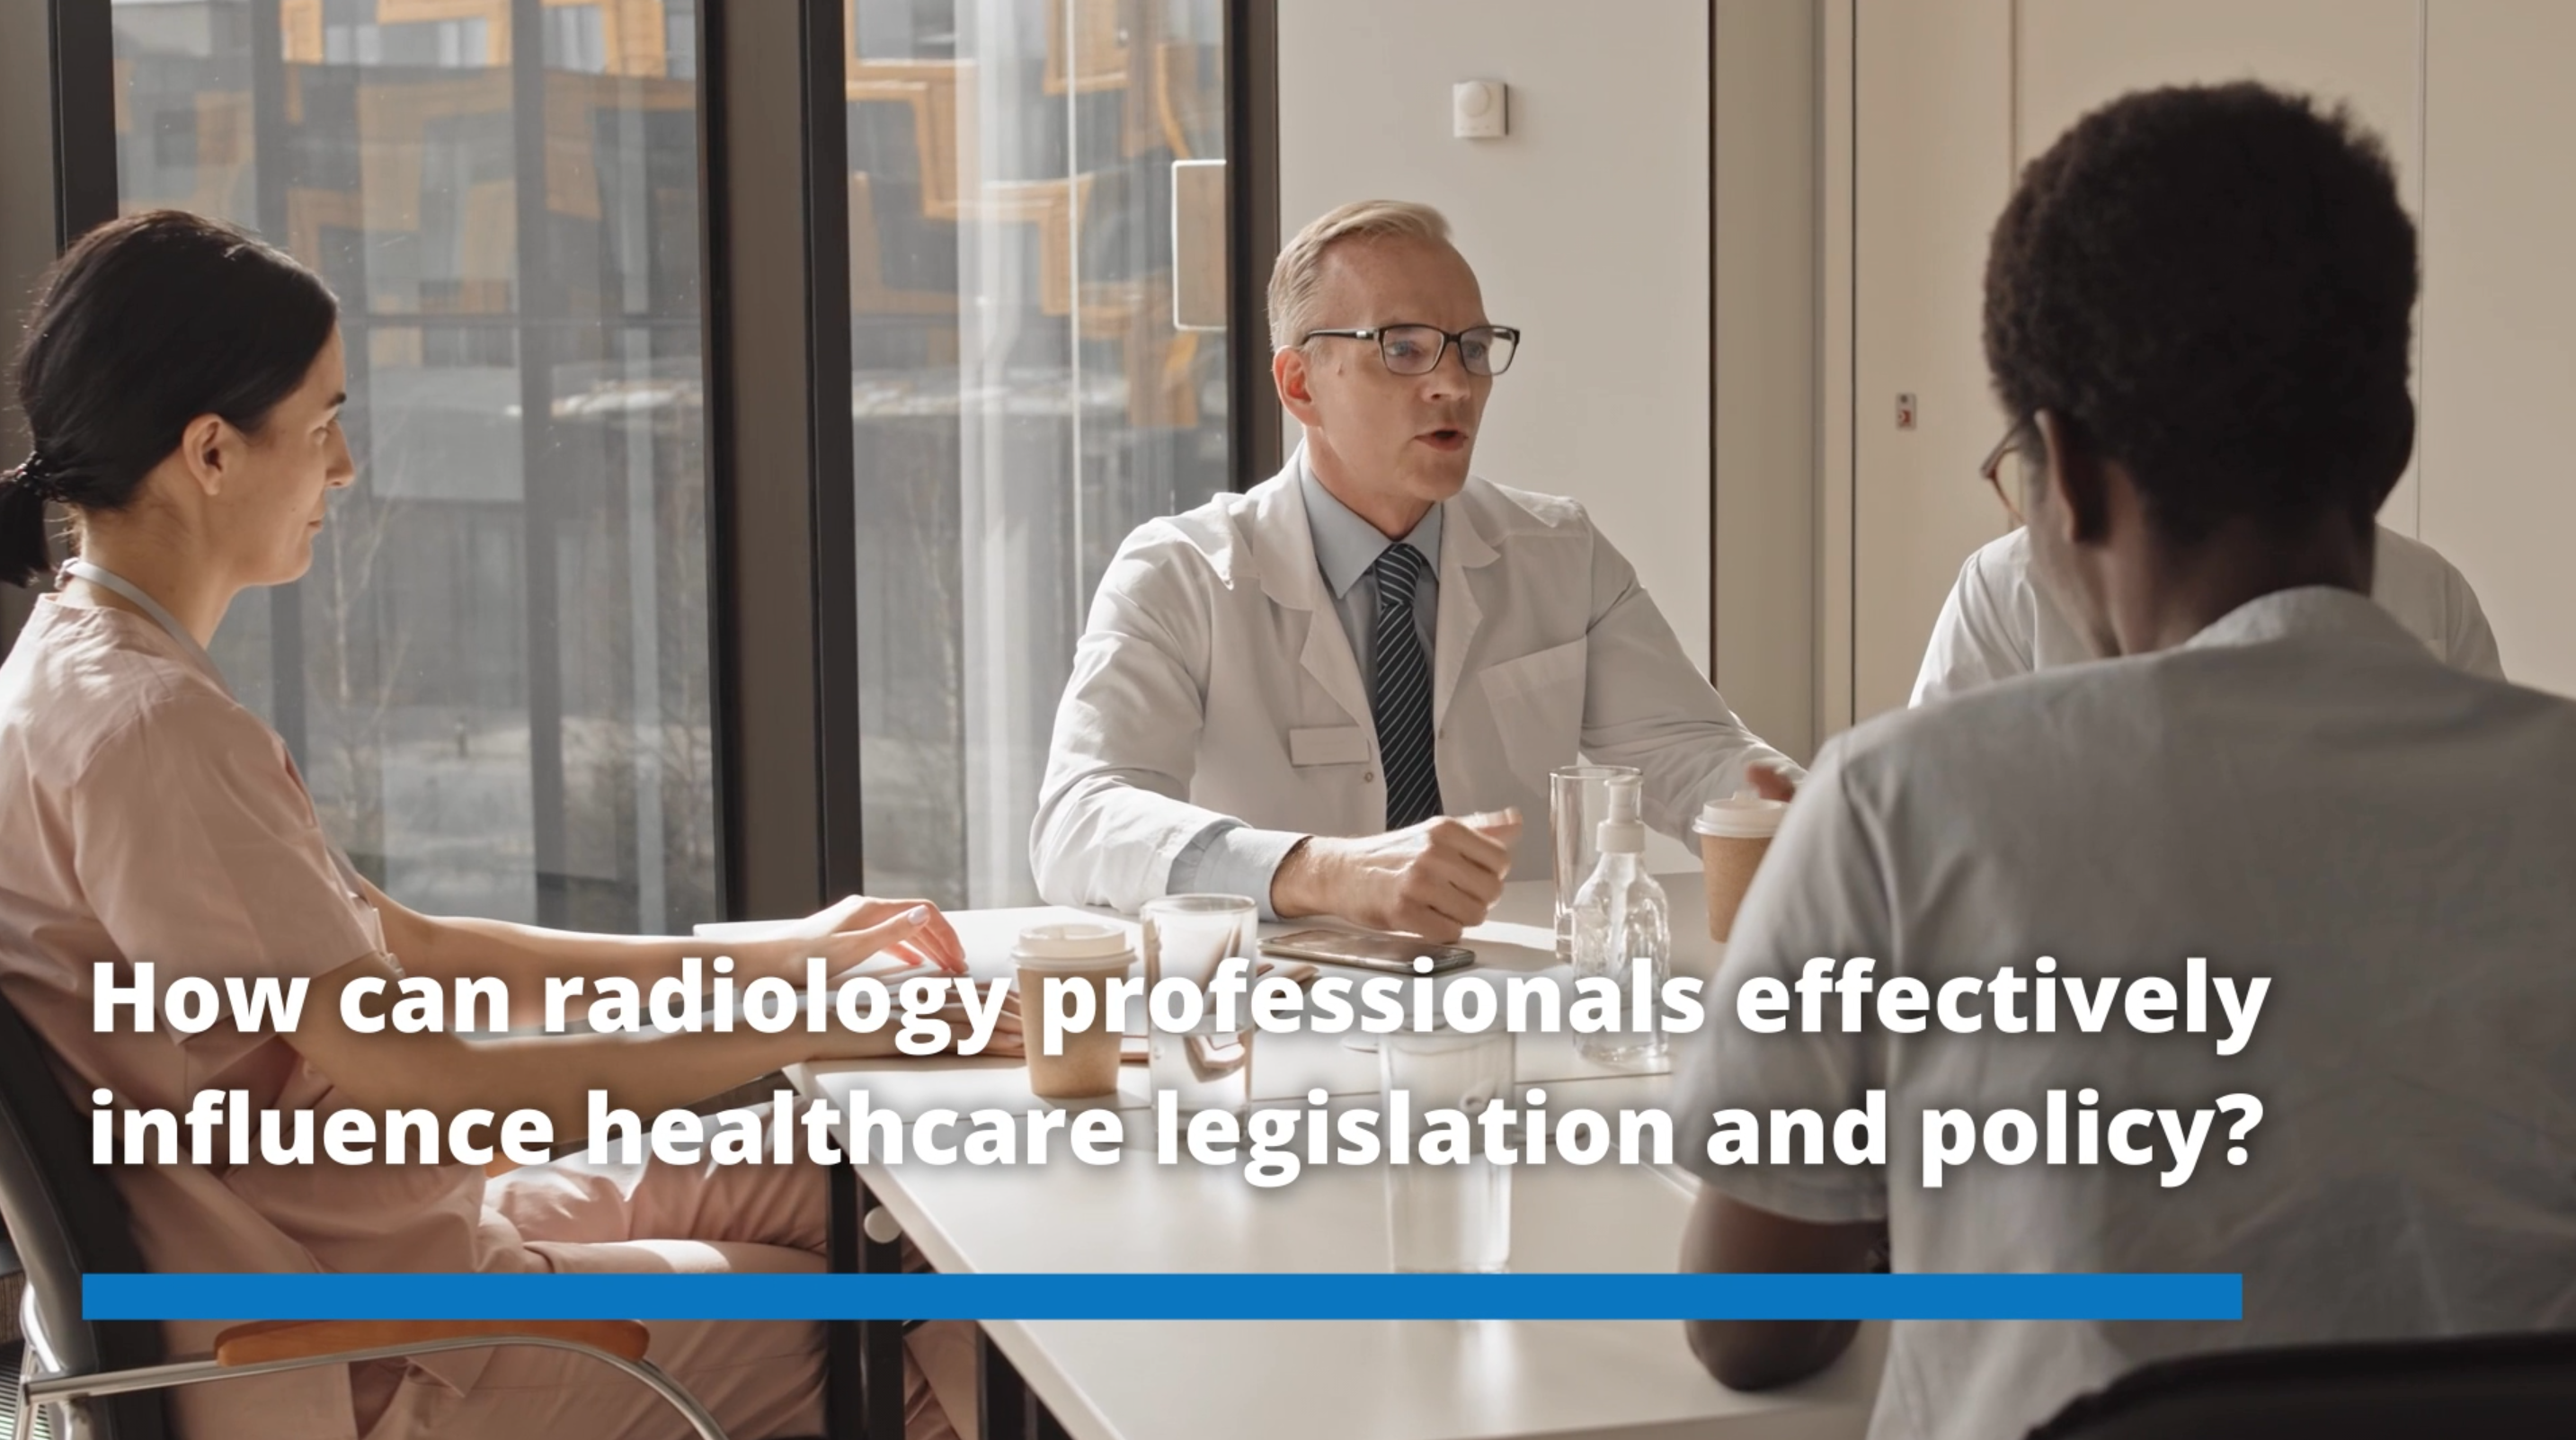 How can radiology professionals effectively influence healthcare legislation and policy?